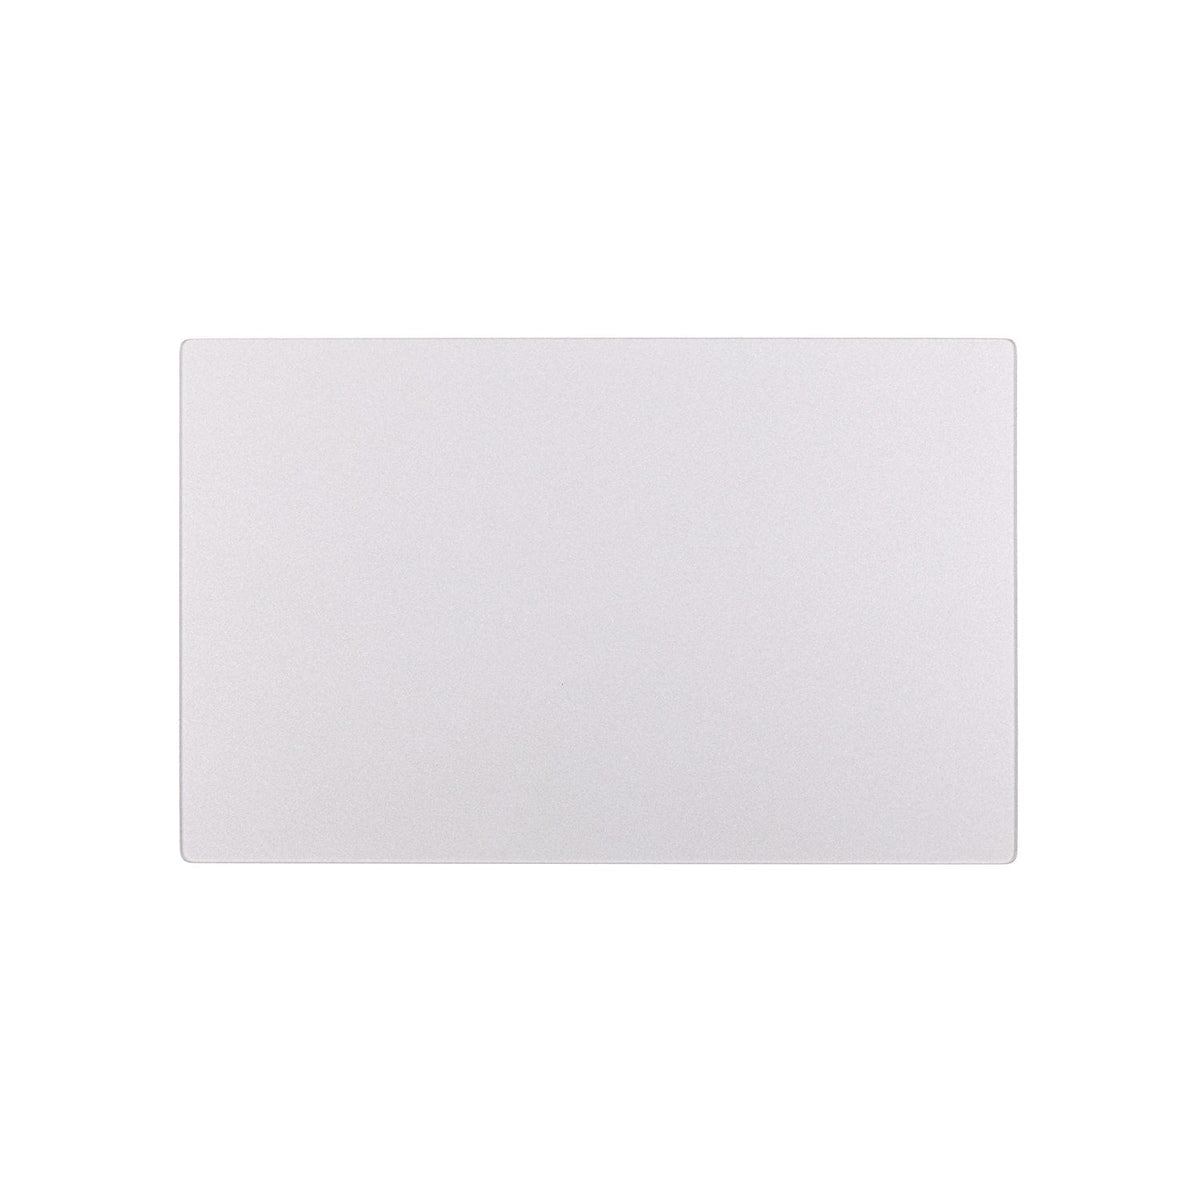 SILVER TRACKPAD FOR MACBOOK 12" RETINA A1534 (EARLY 2016-MID 2017)